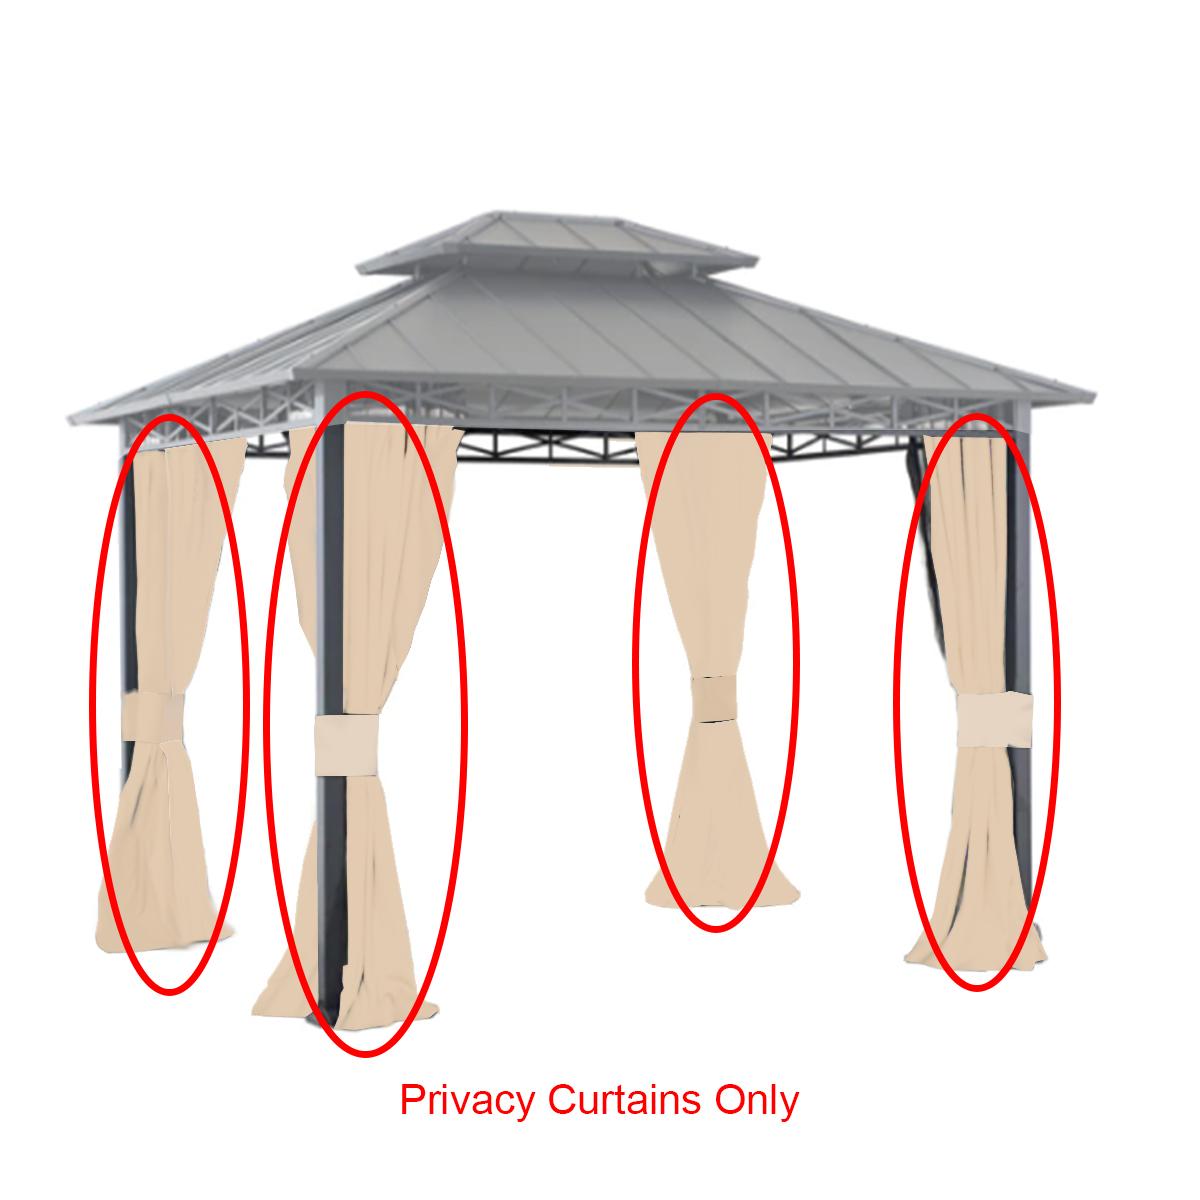 Universal Replacement Privacy Curtain Set for 11' X 9' Hard Top